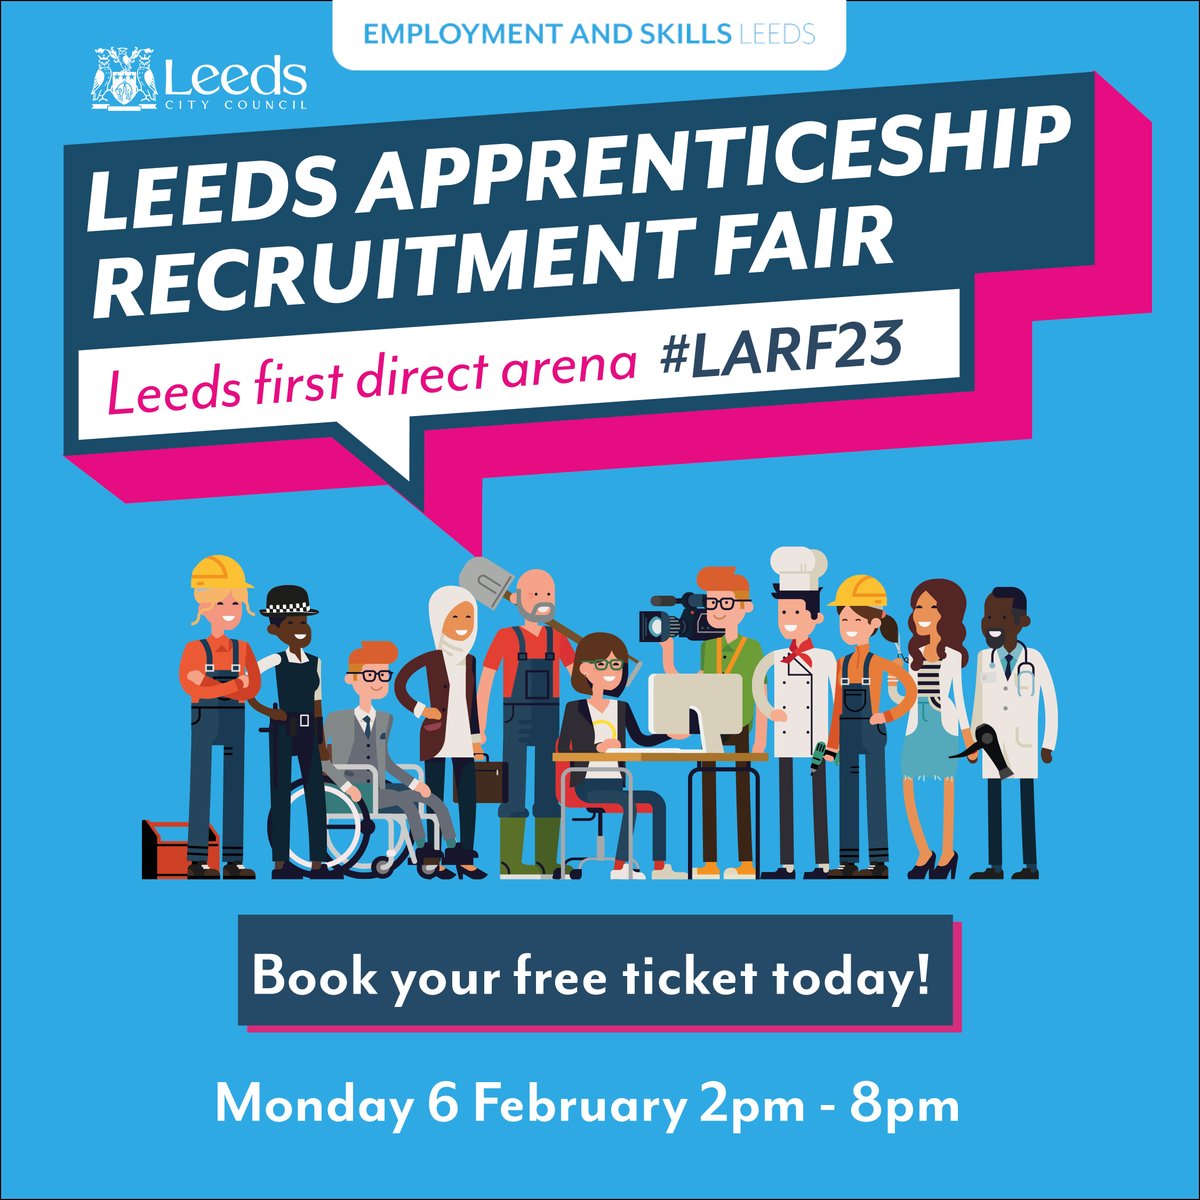 As you may know, Leeds Apprenticeship Recruitment Fair returns to first direct arena Leeds on Monday 6th February 2023 2pm-8pm. The event is free to attend. Free tickets are available at: bit.ly/LARF2023